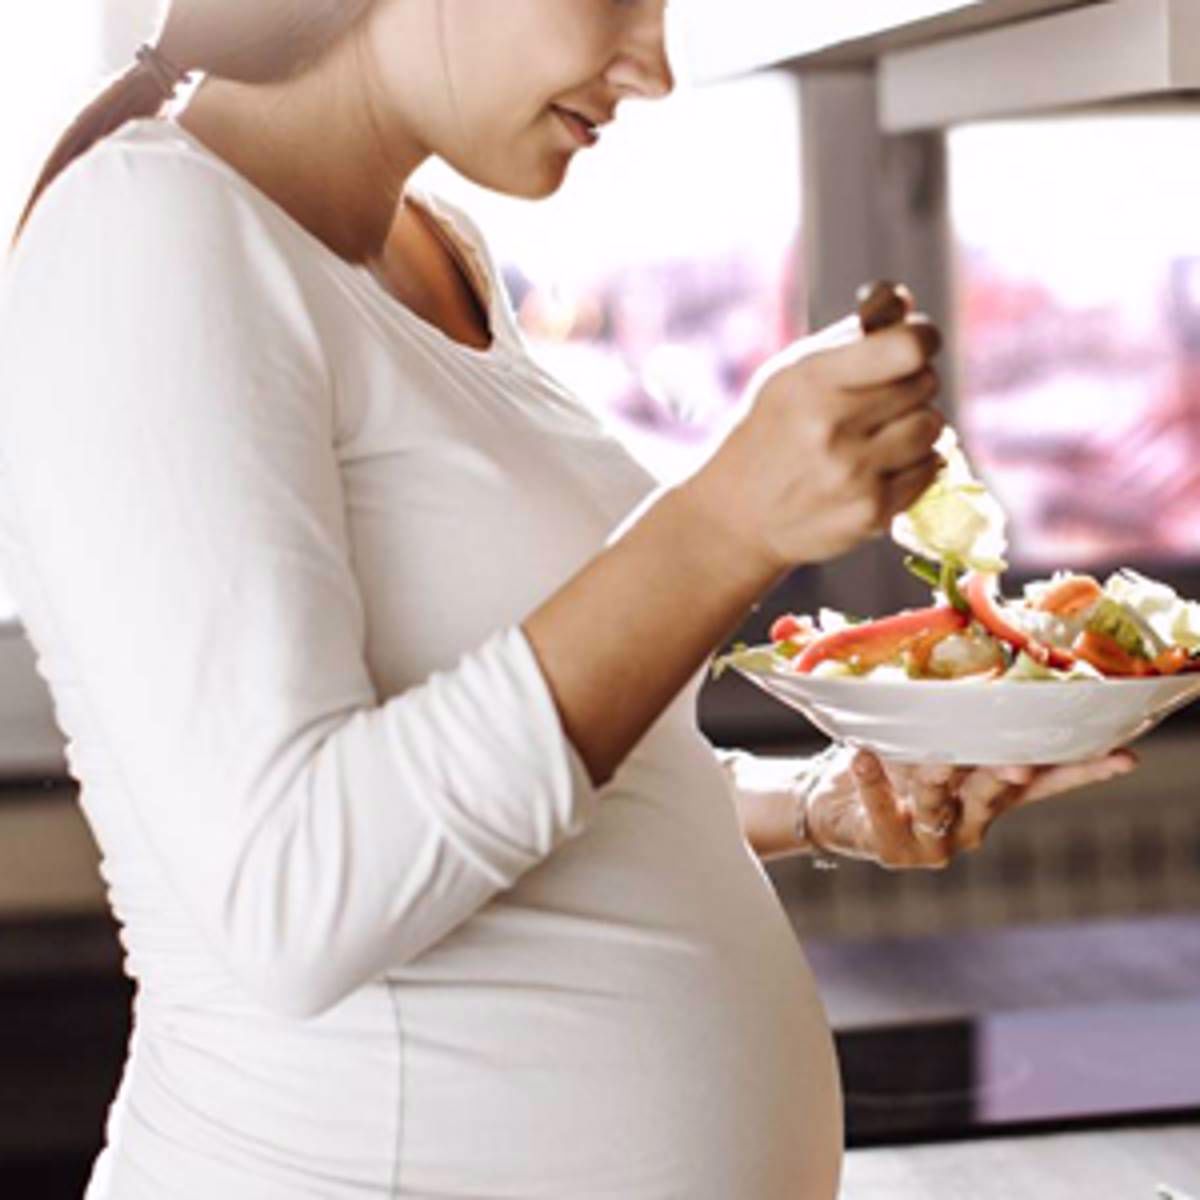 How Can I Eat Healthily During Pregnancy?